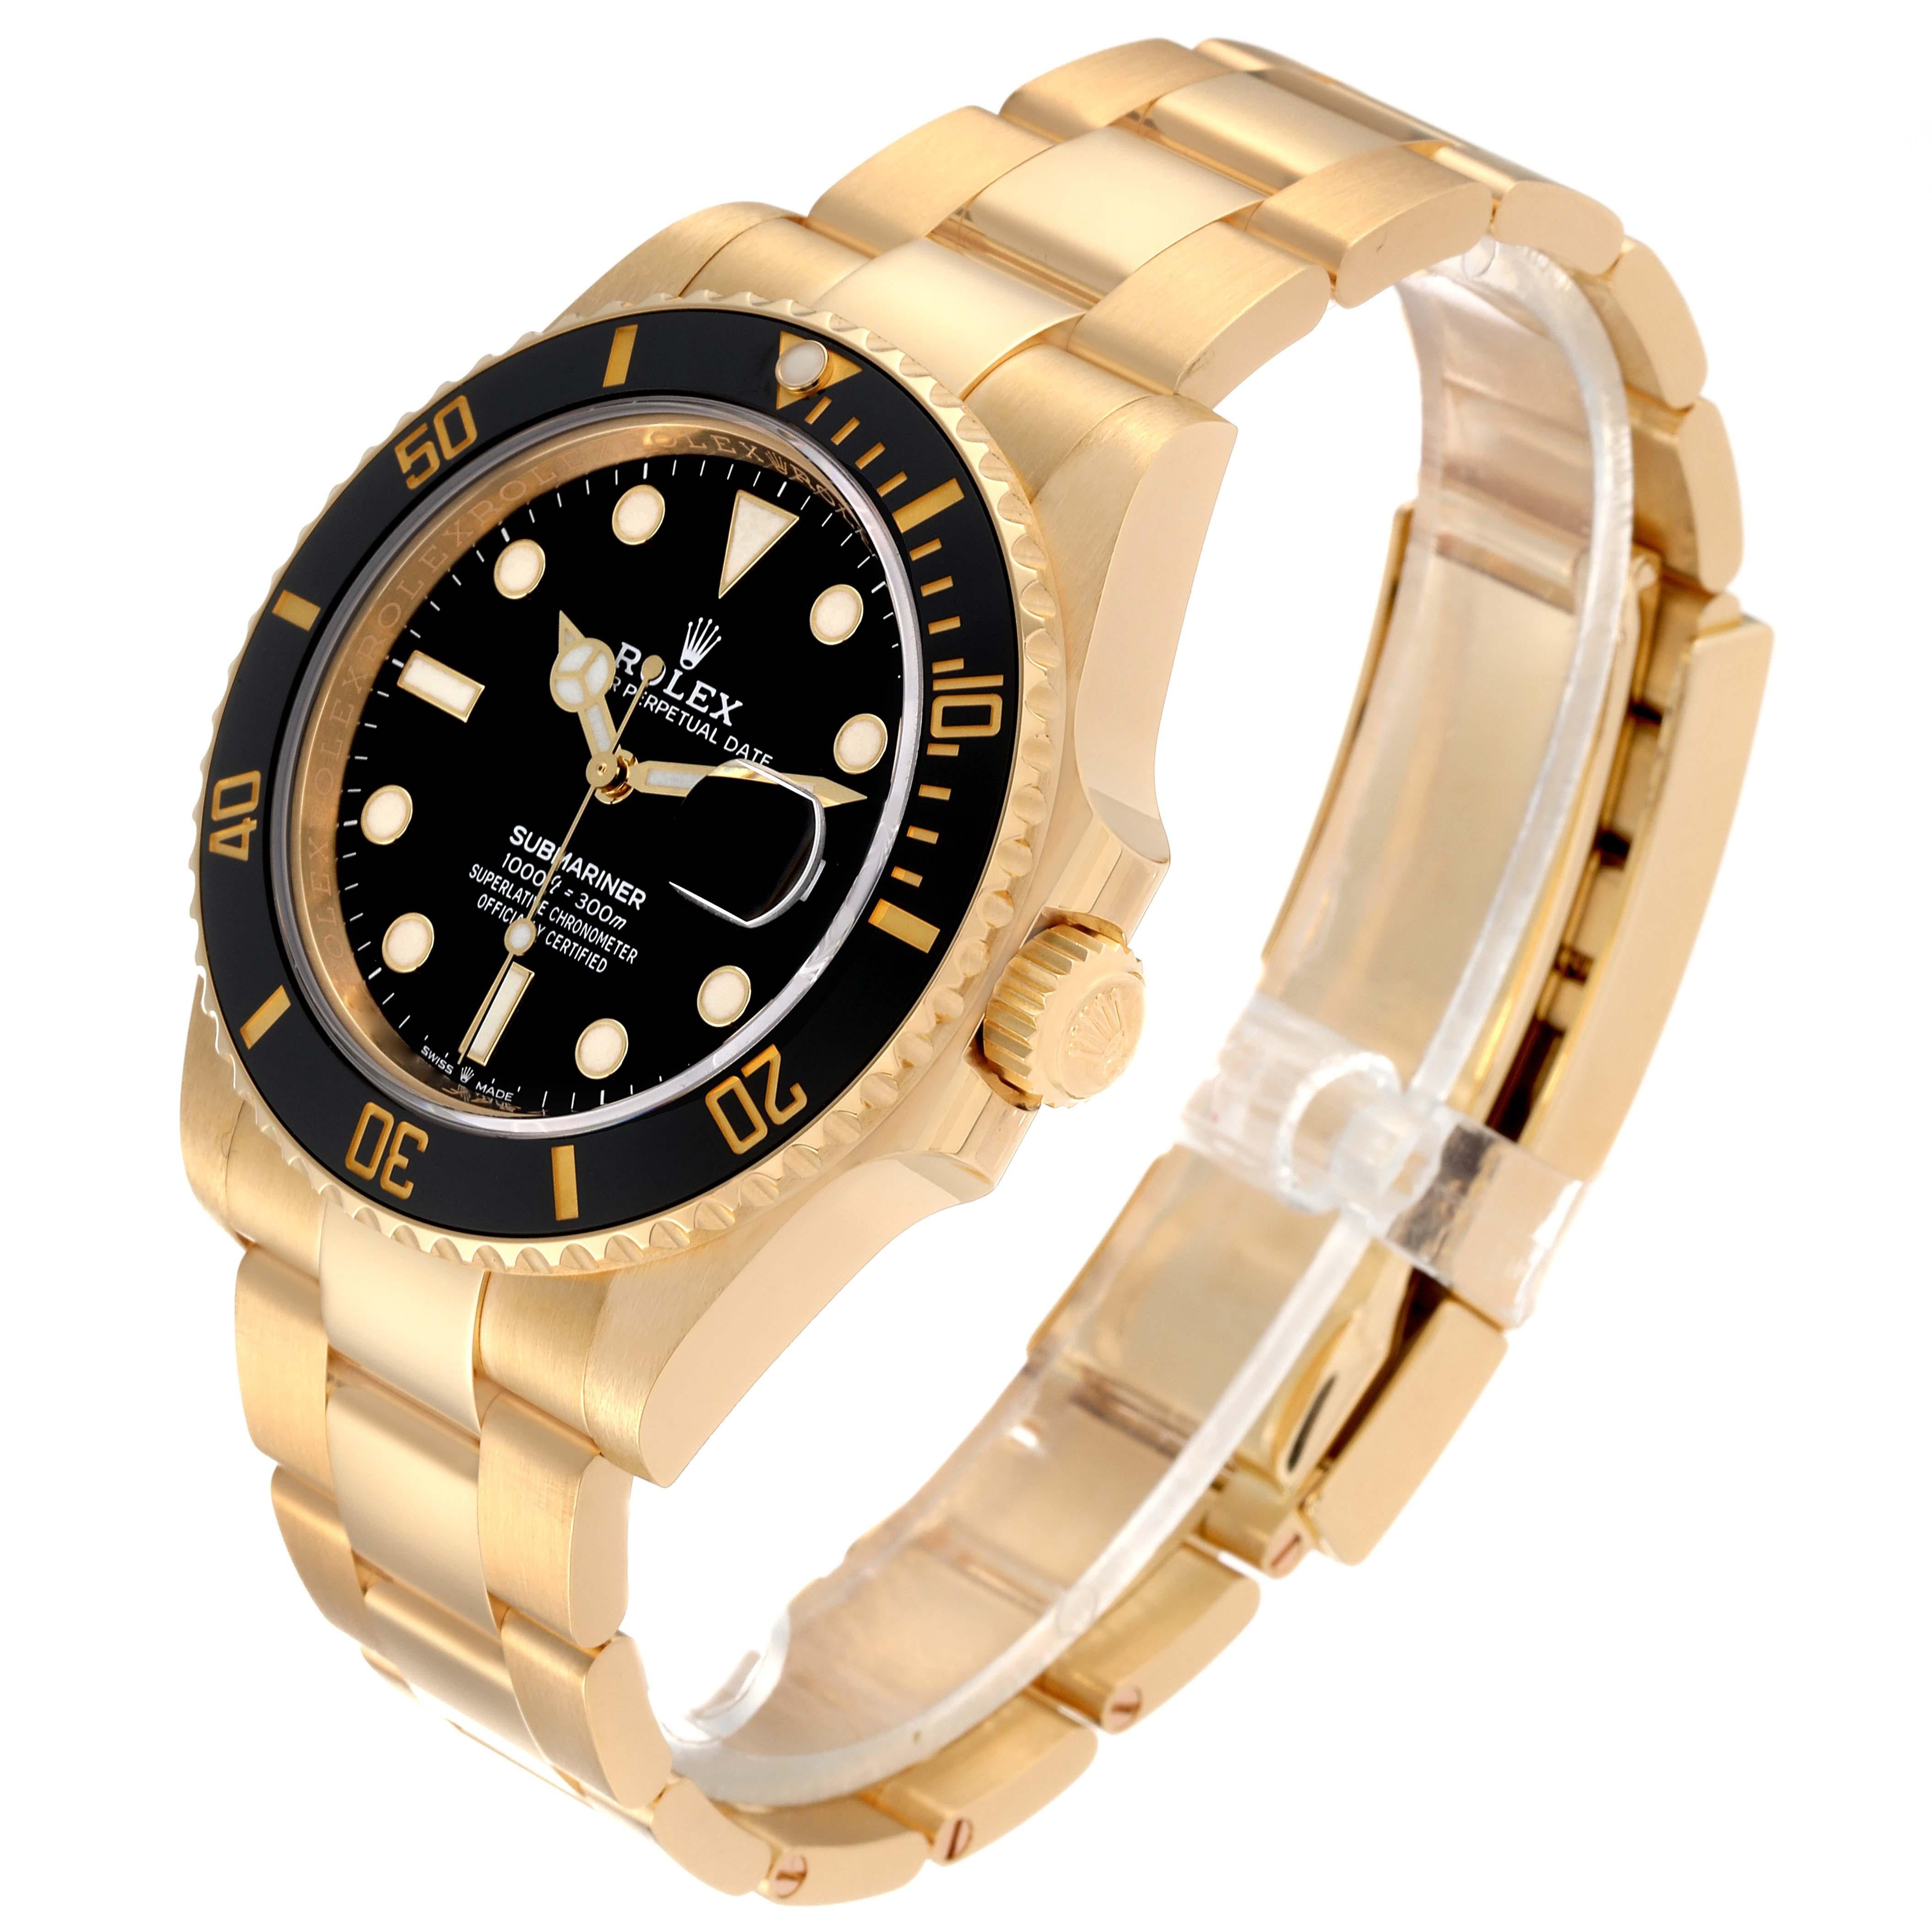 Men's Rolex Submariner Yellow Gold Black Dial Bezel Mens Watch 126618 Box Card For Sale